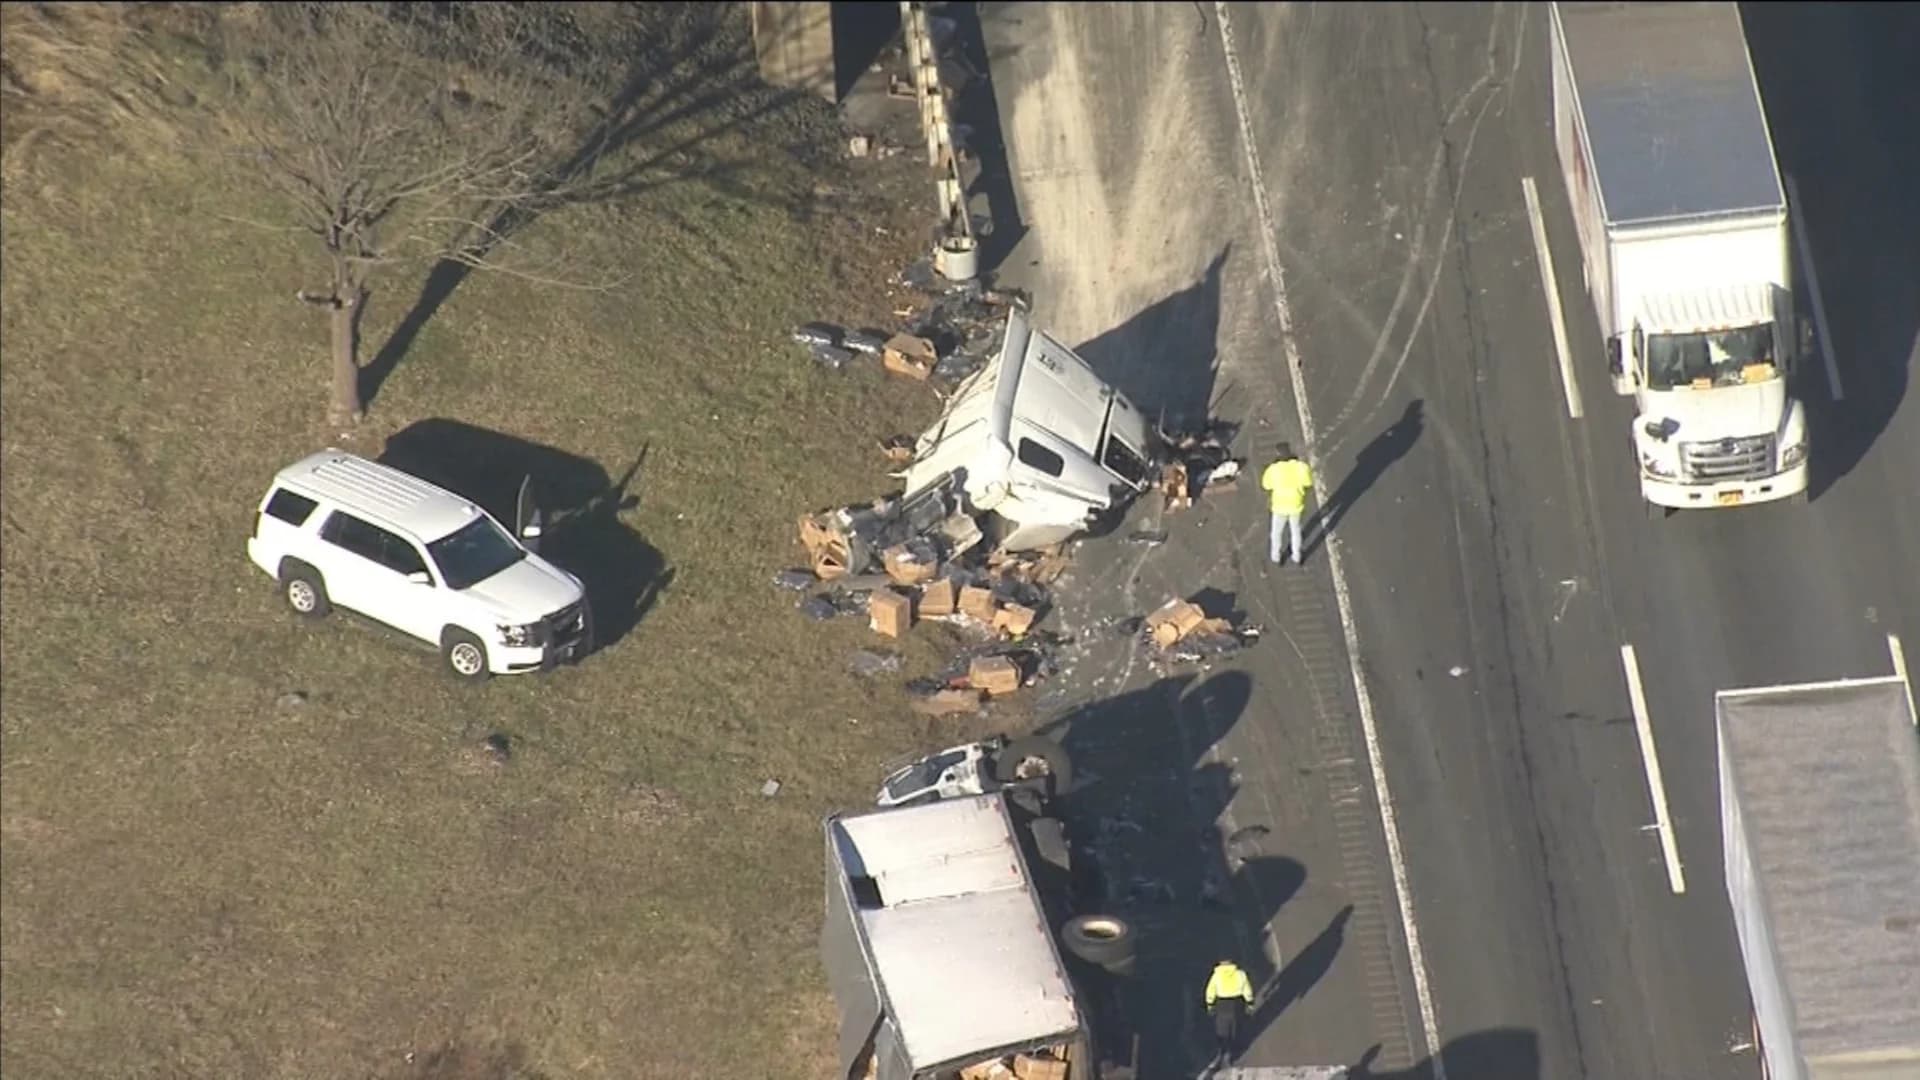 Multi-vehicle crash closes lanes, causes delays on New Jersey Turnpike